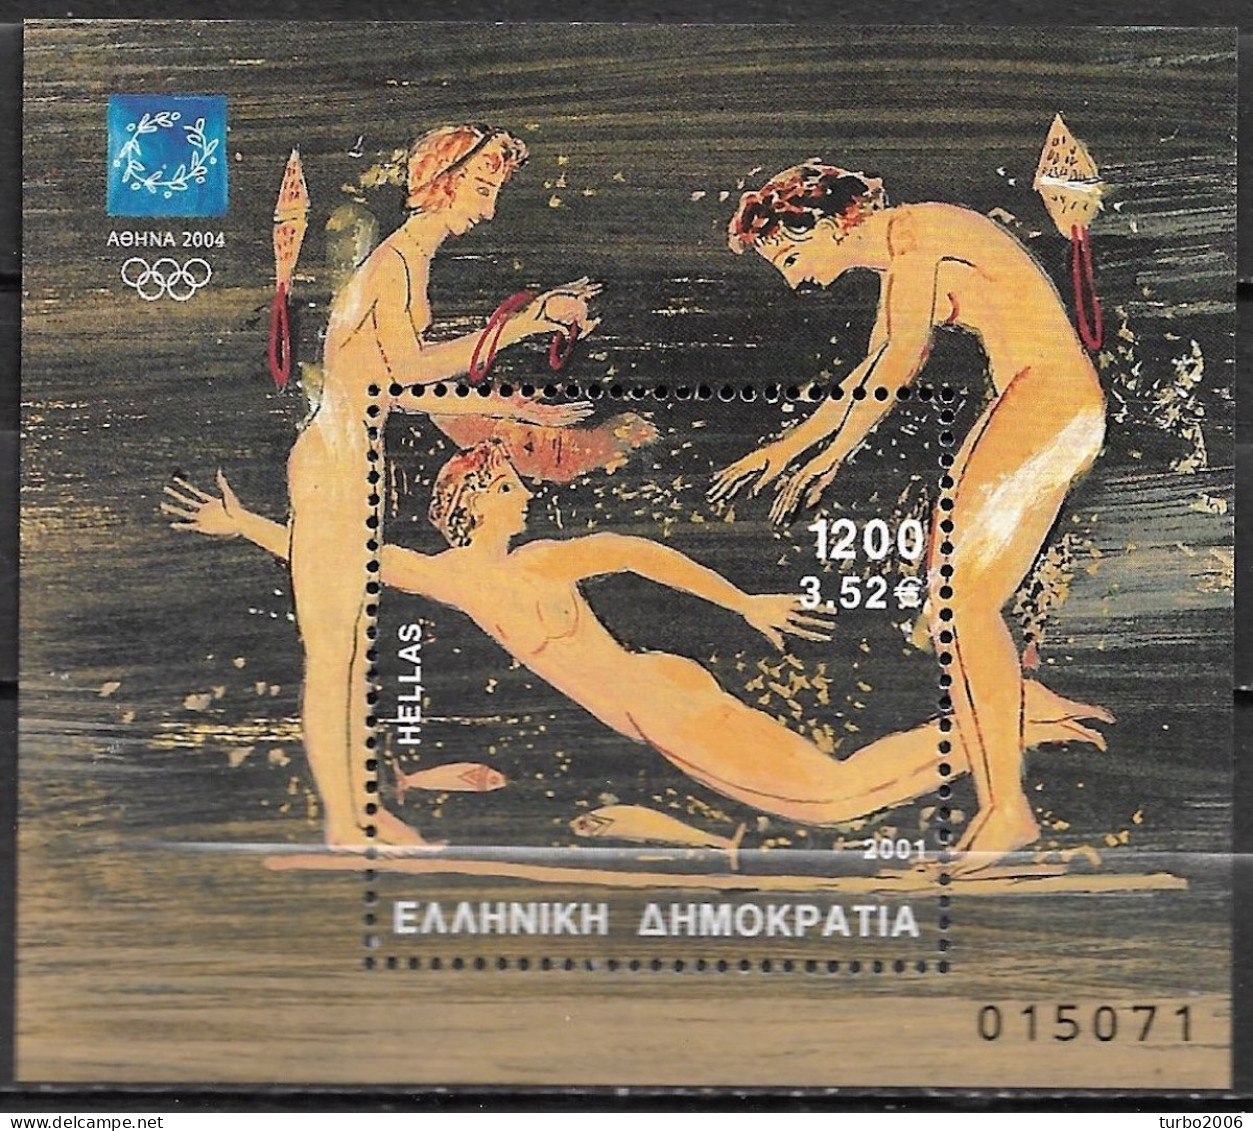 GREECE 2001 Athens 2004 2nd Issue Olympic Games Miniature Sheet Dr. 1200 Vl. B 19 MNH - Blocs-feuillets